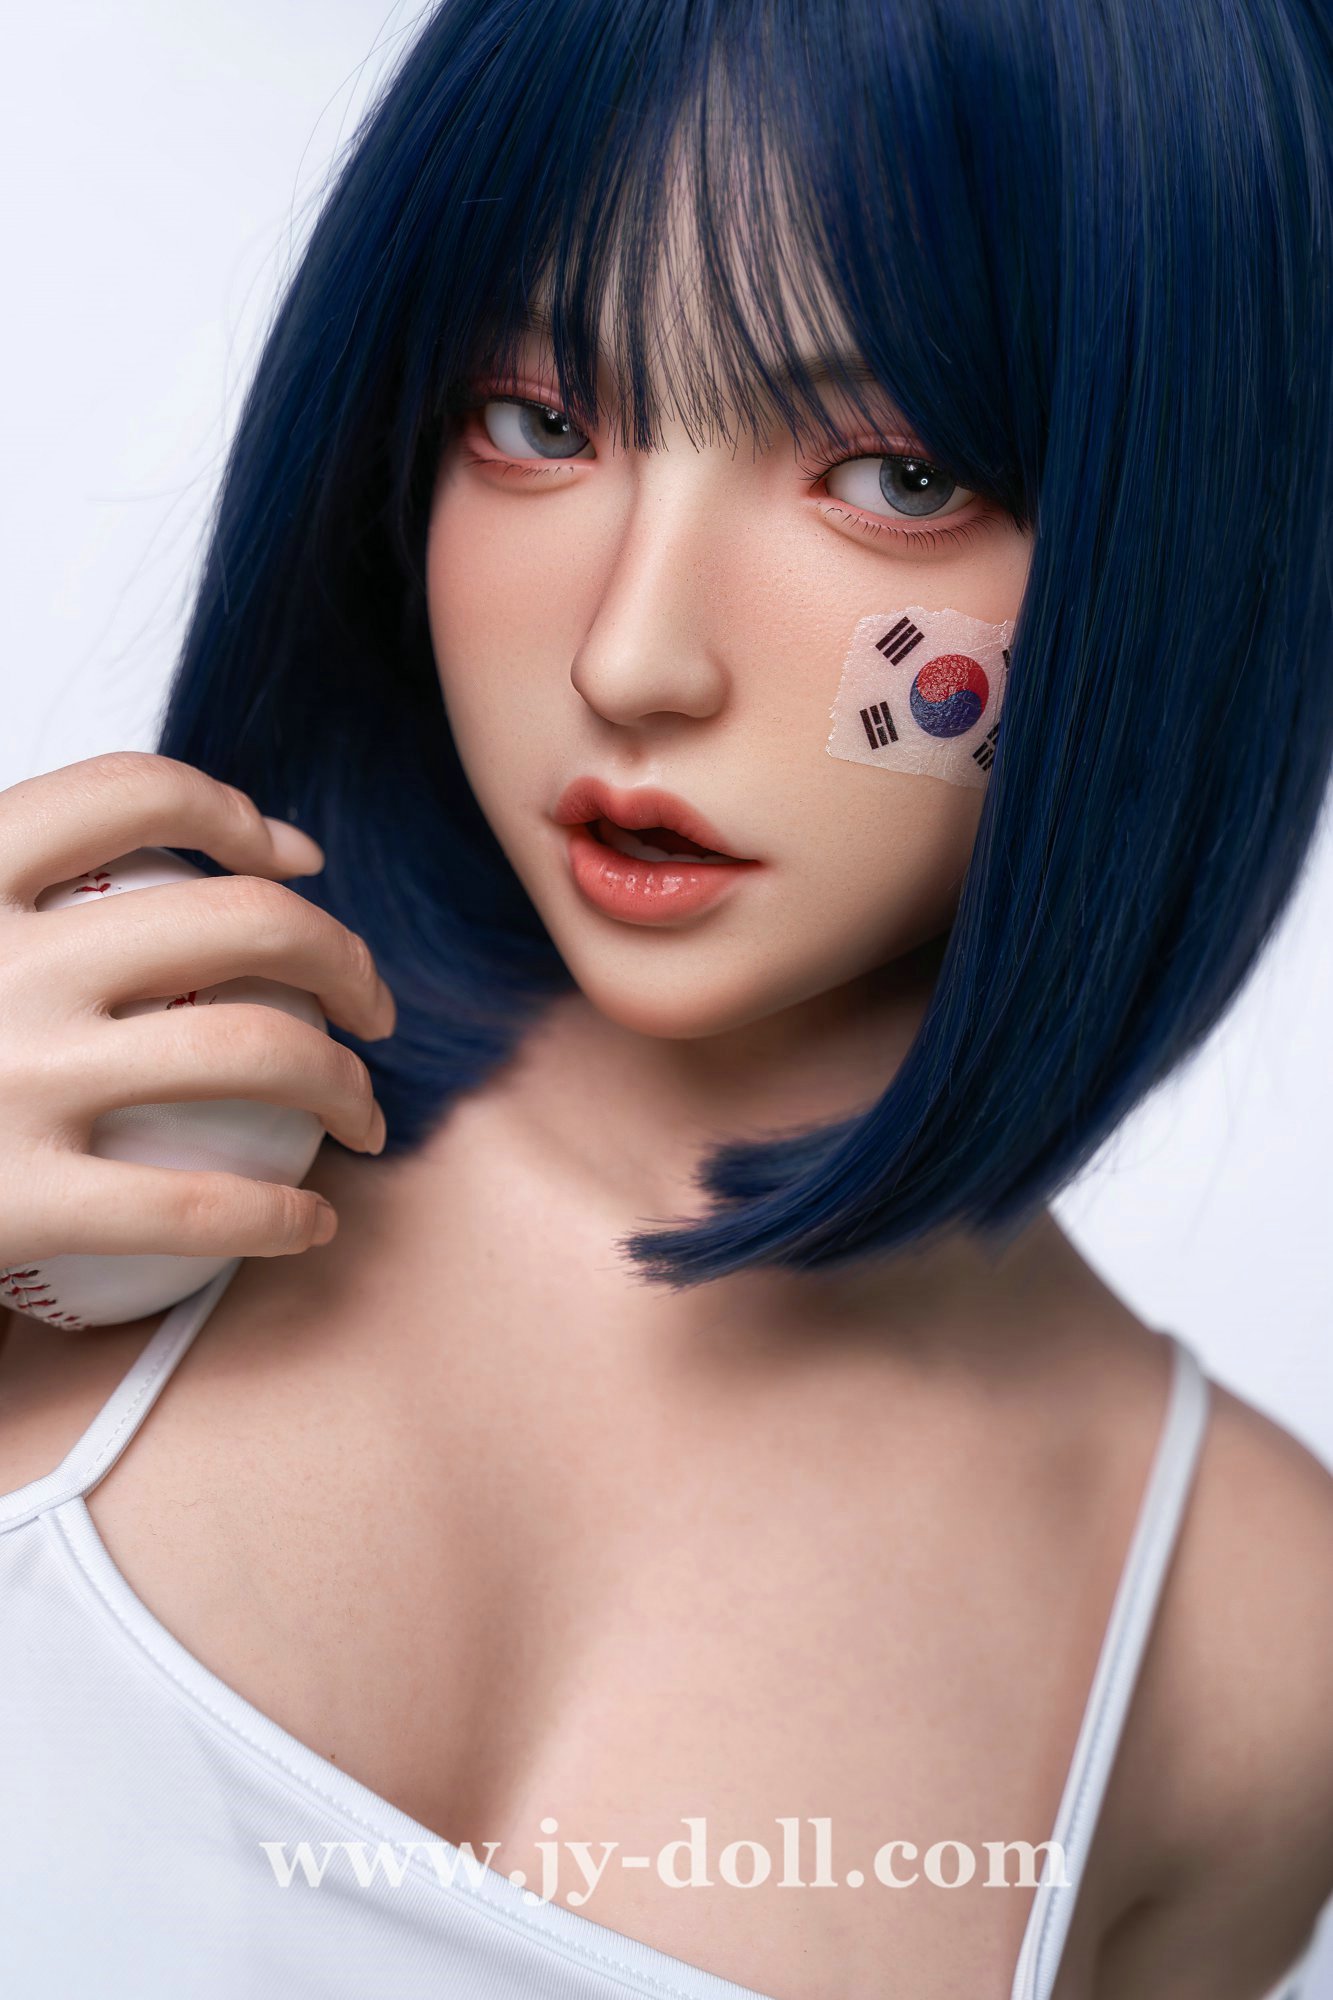 JY Doll real simulated oral function